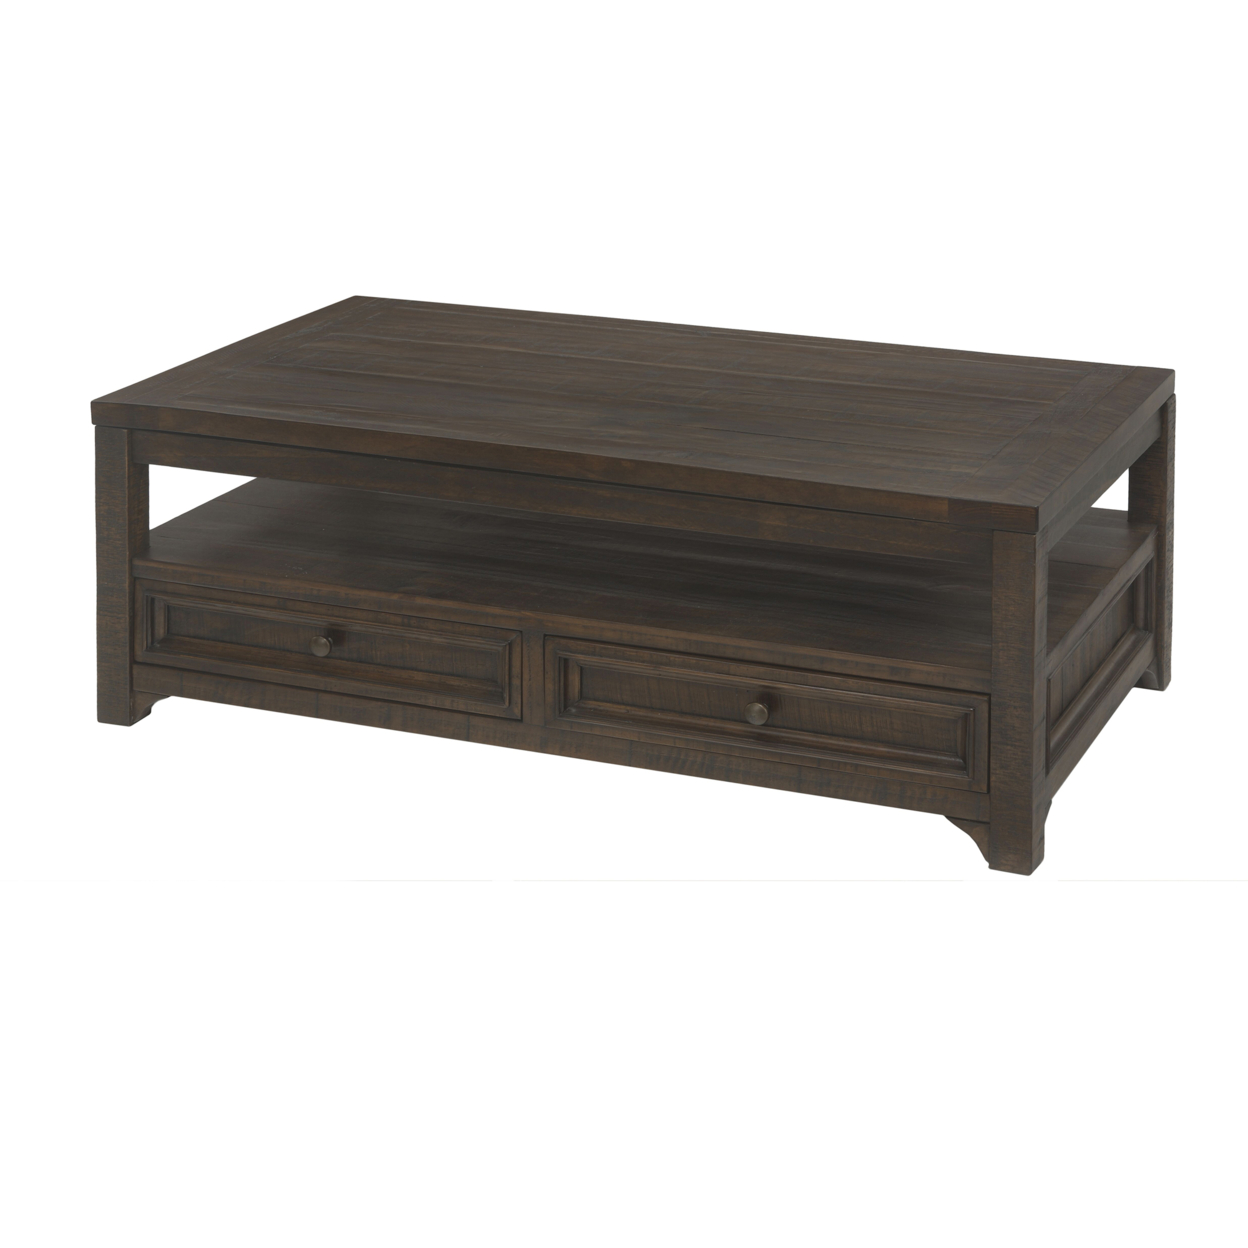 Rectangular Wooden Lift Top Coffee Table With 2 Drawers, Brown- Saltoro Sherpi